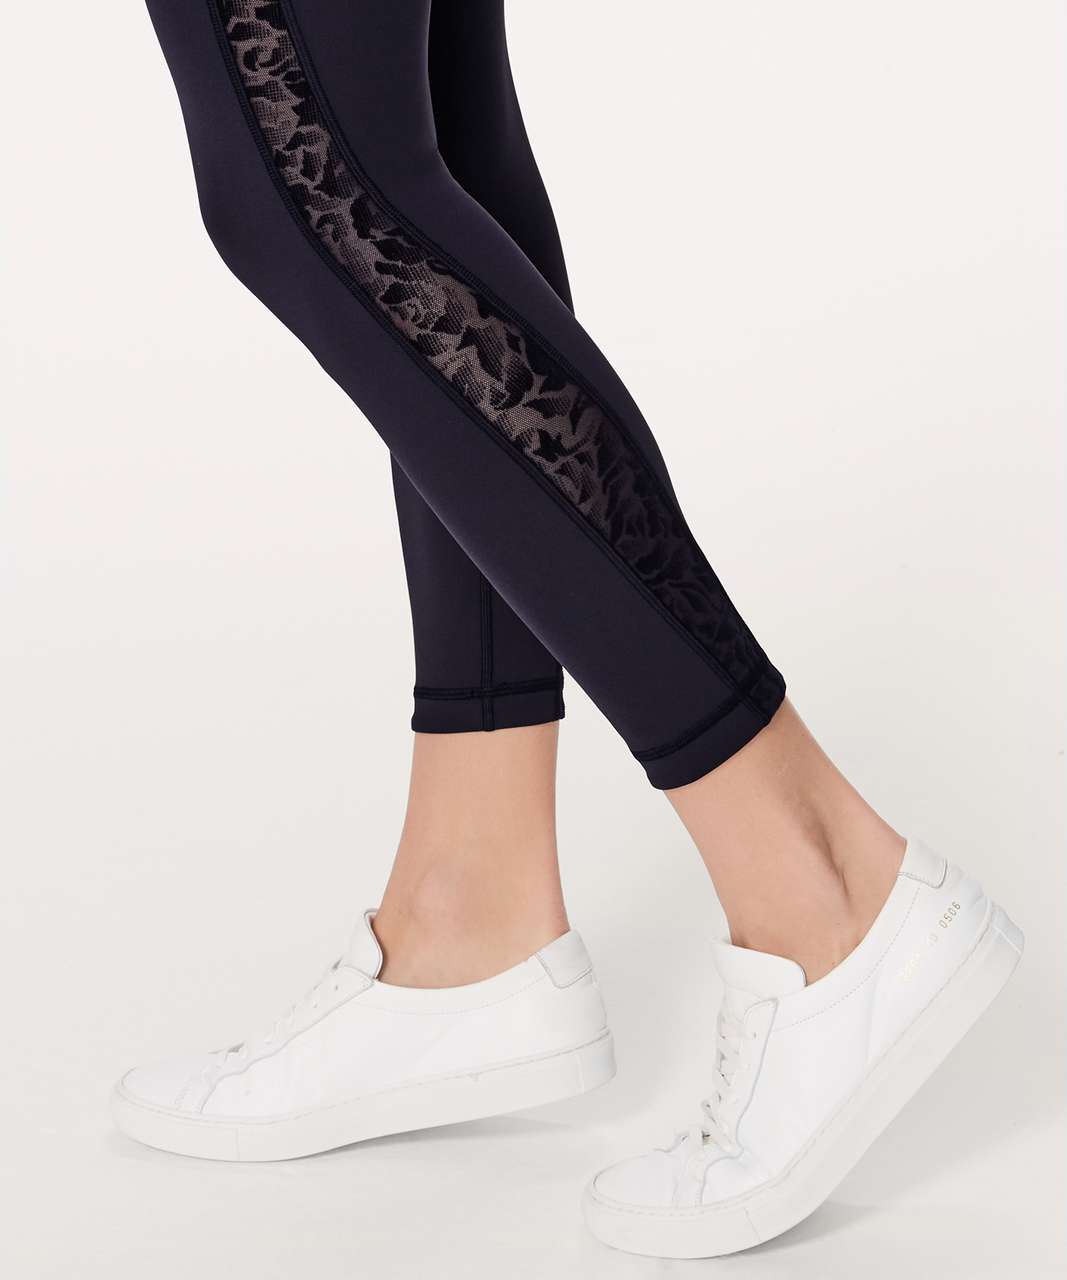 Lululemon Meant To Move 7/8 Tight (25") - Midnight Navy / Flocked Floral Midnight Navy Midnight Navy